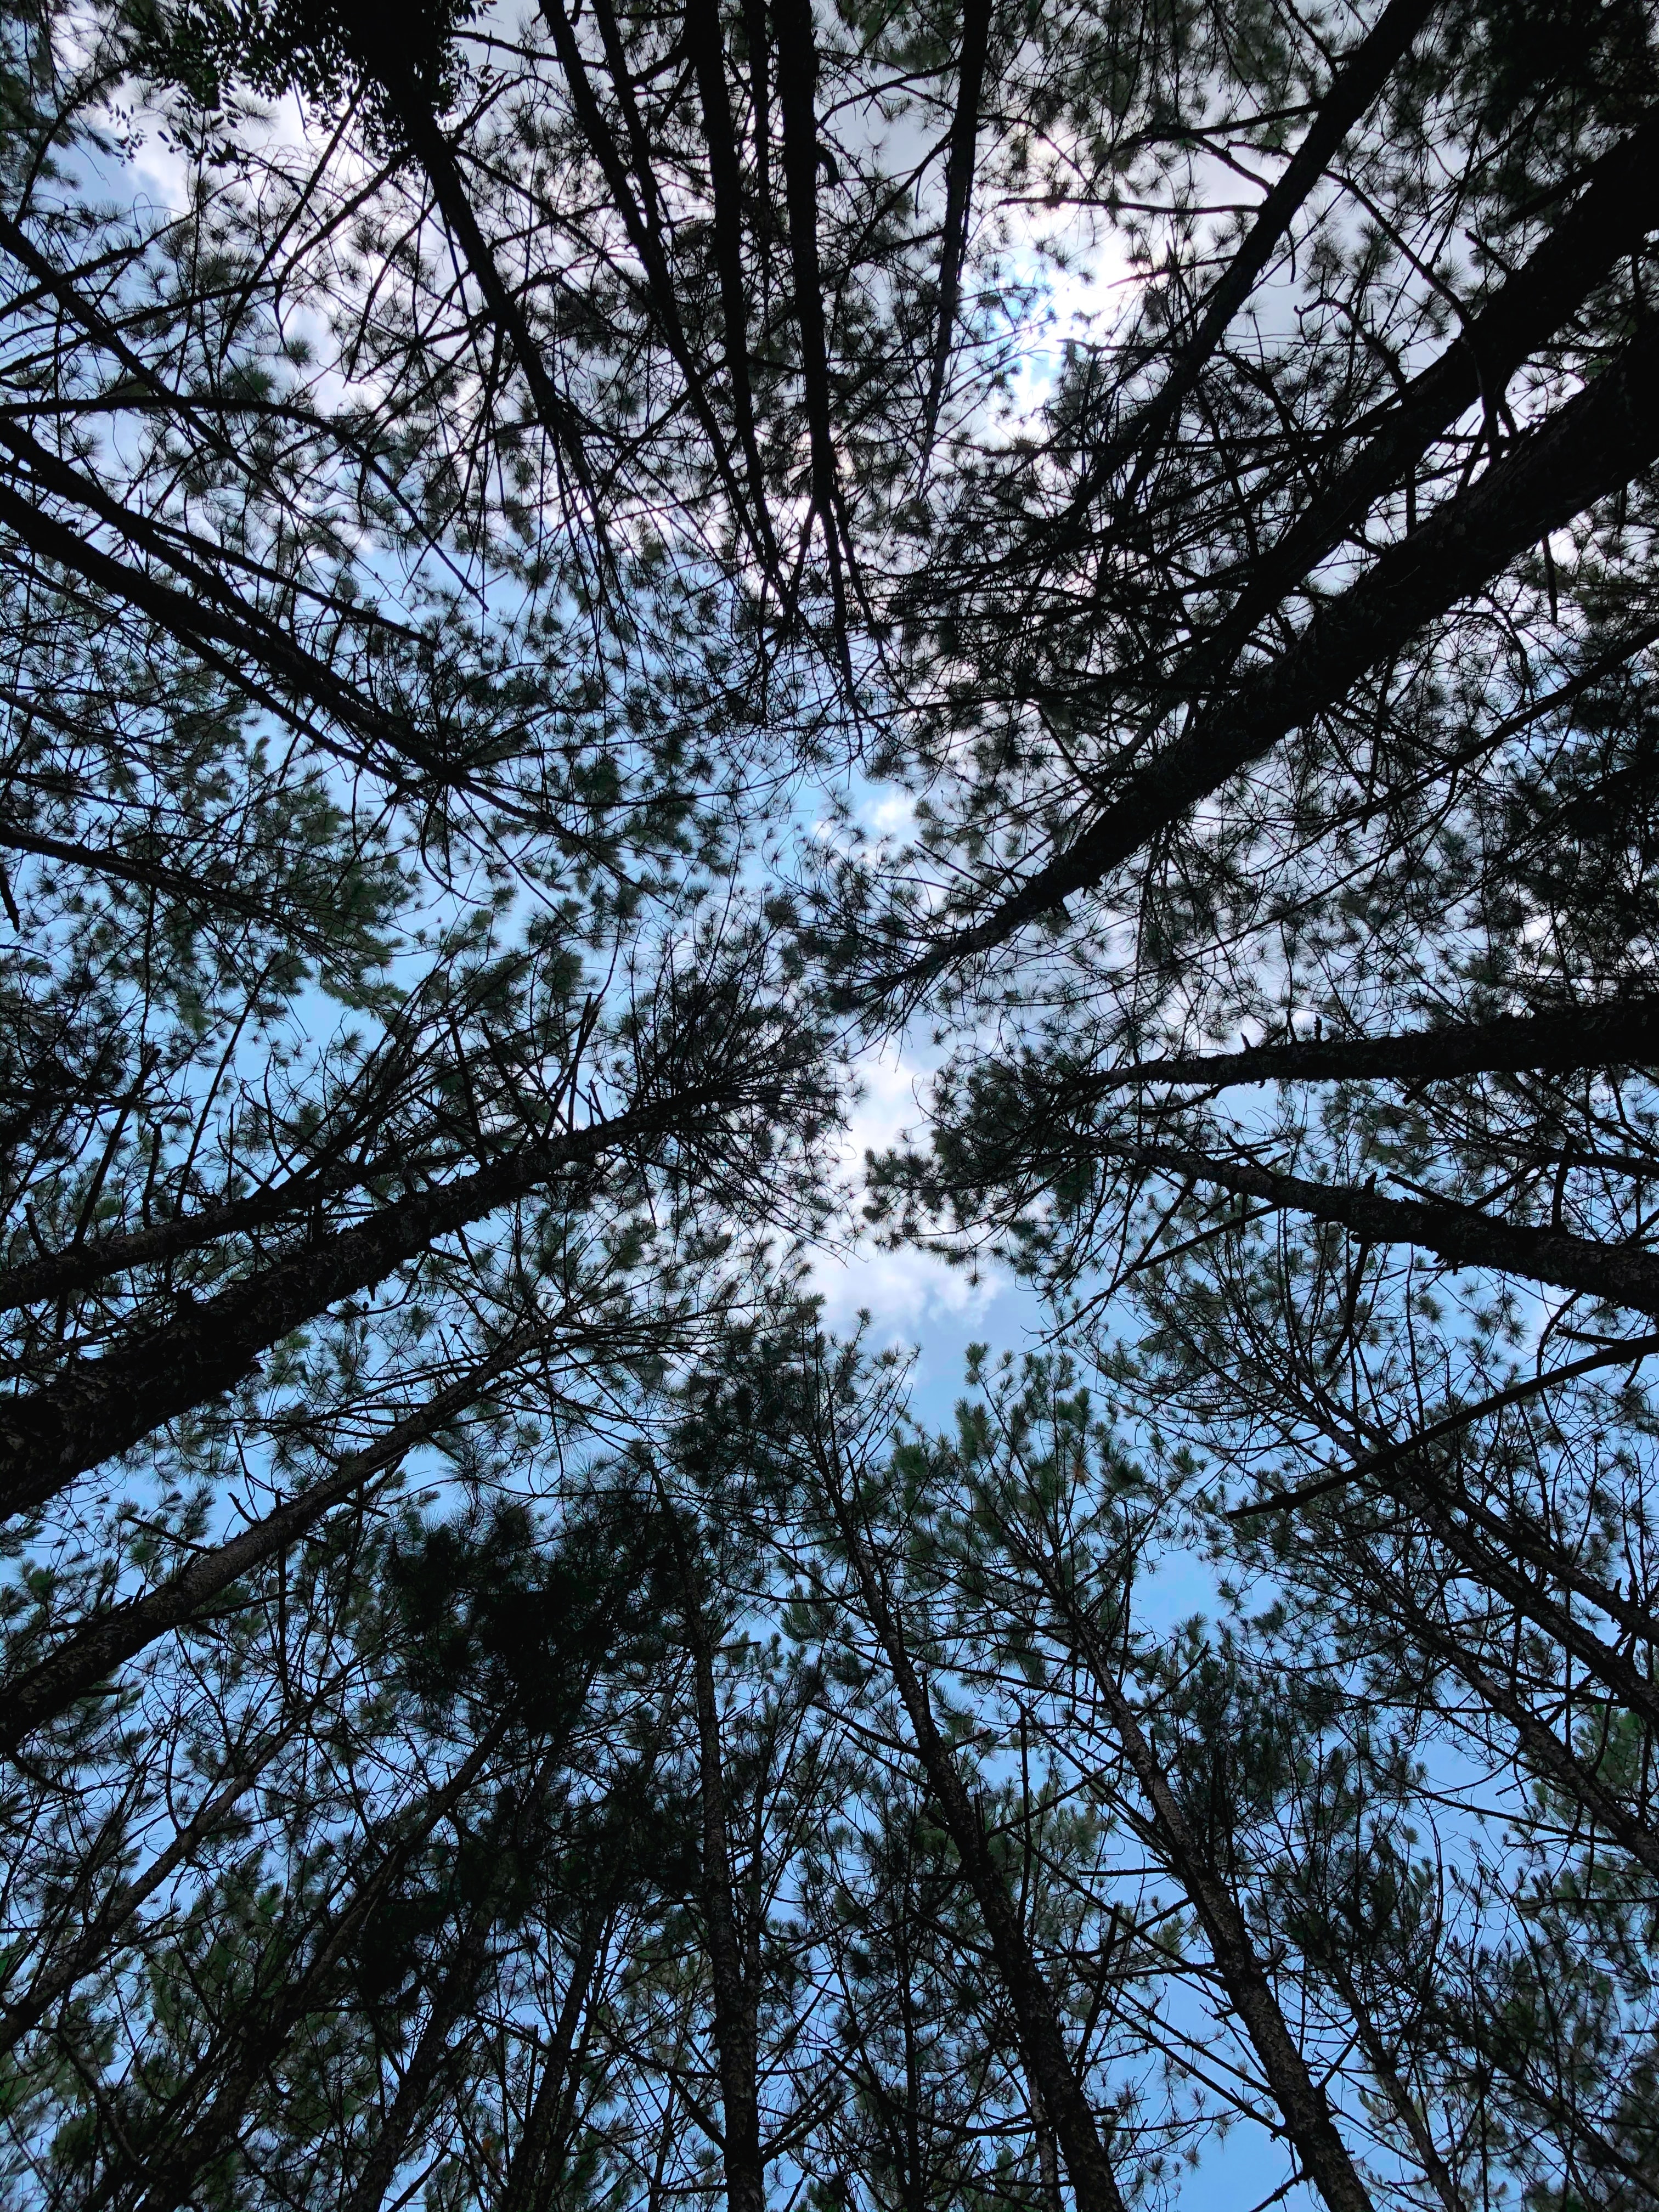 Desktop FHD nature, trees, sky, forest, branches, bottom view